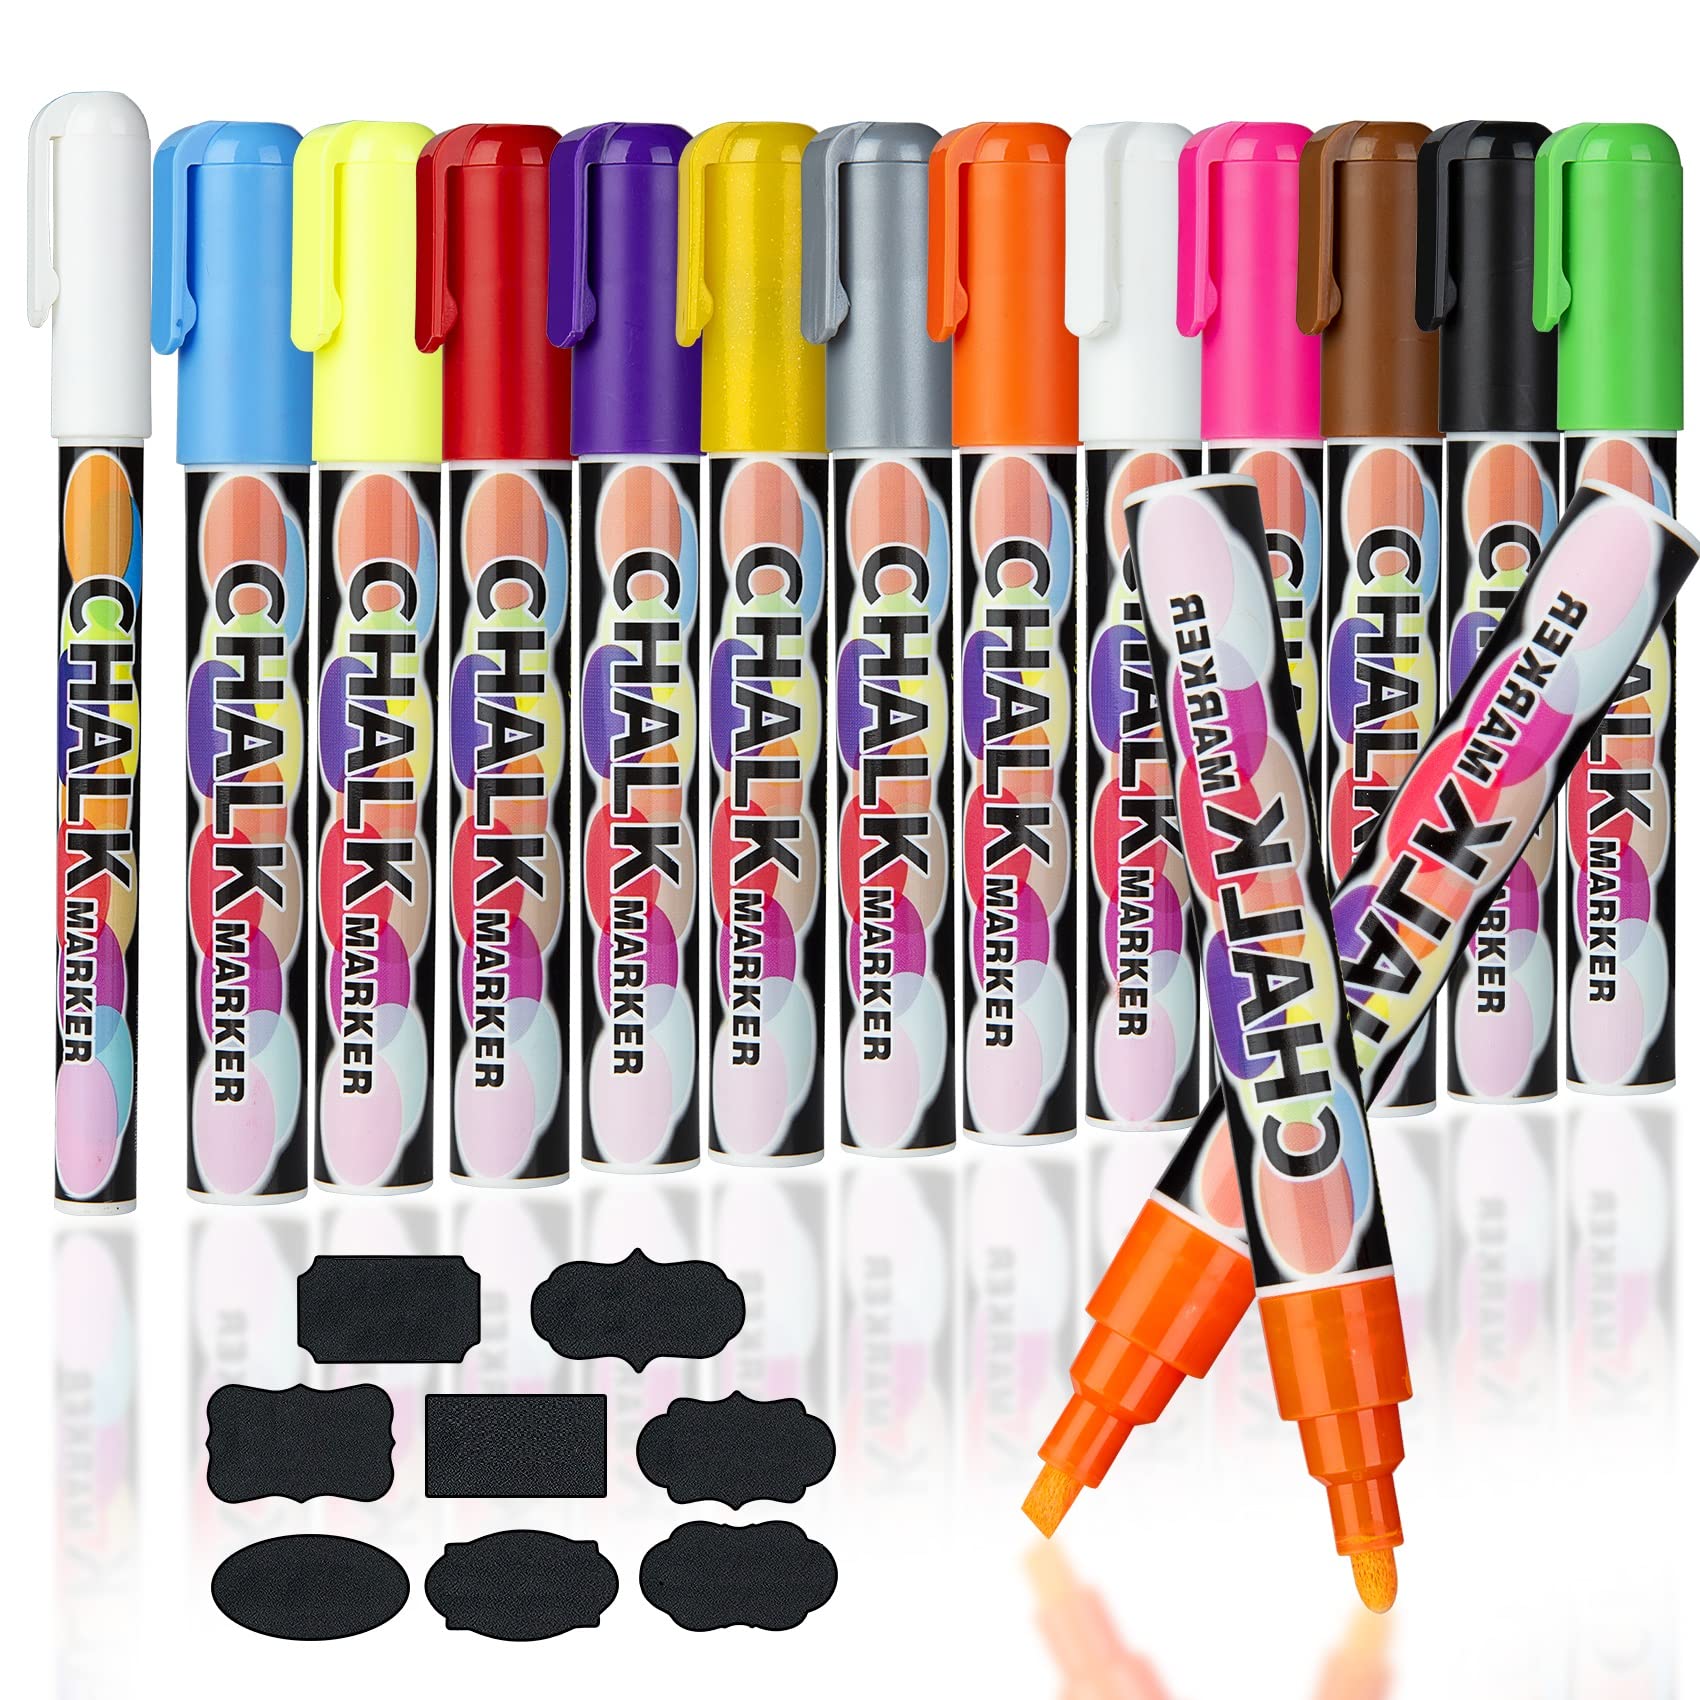 Pincelma 13 Packs Liquid Chalk Markers for Chalkboard Dry Erase